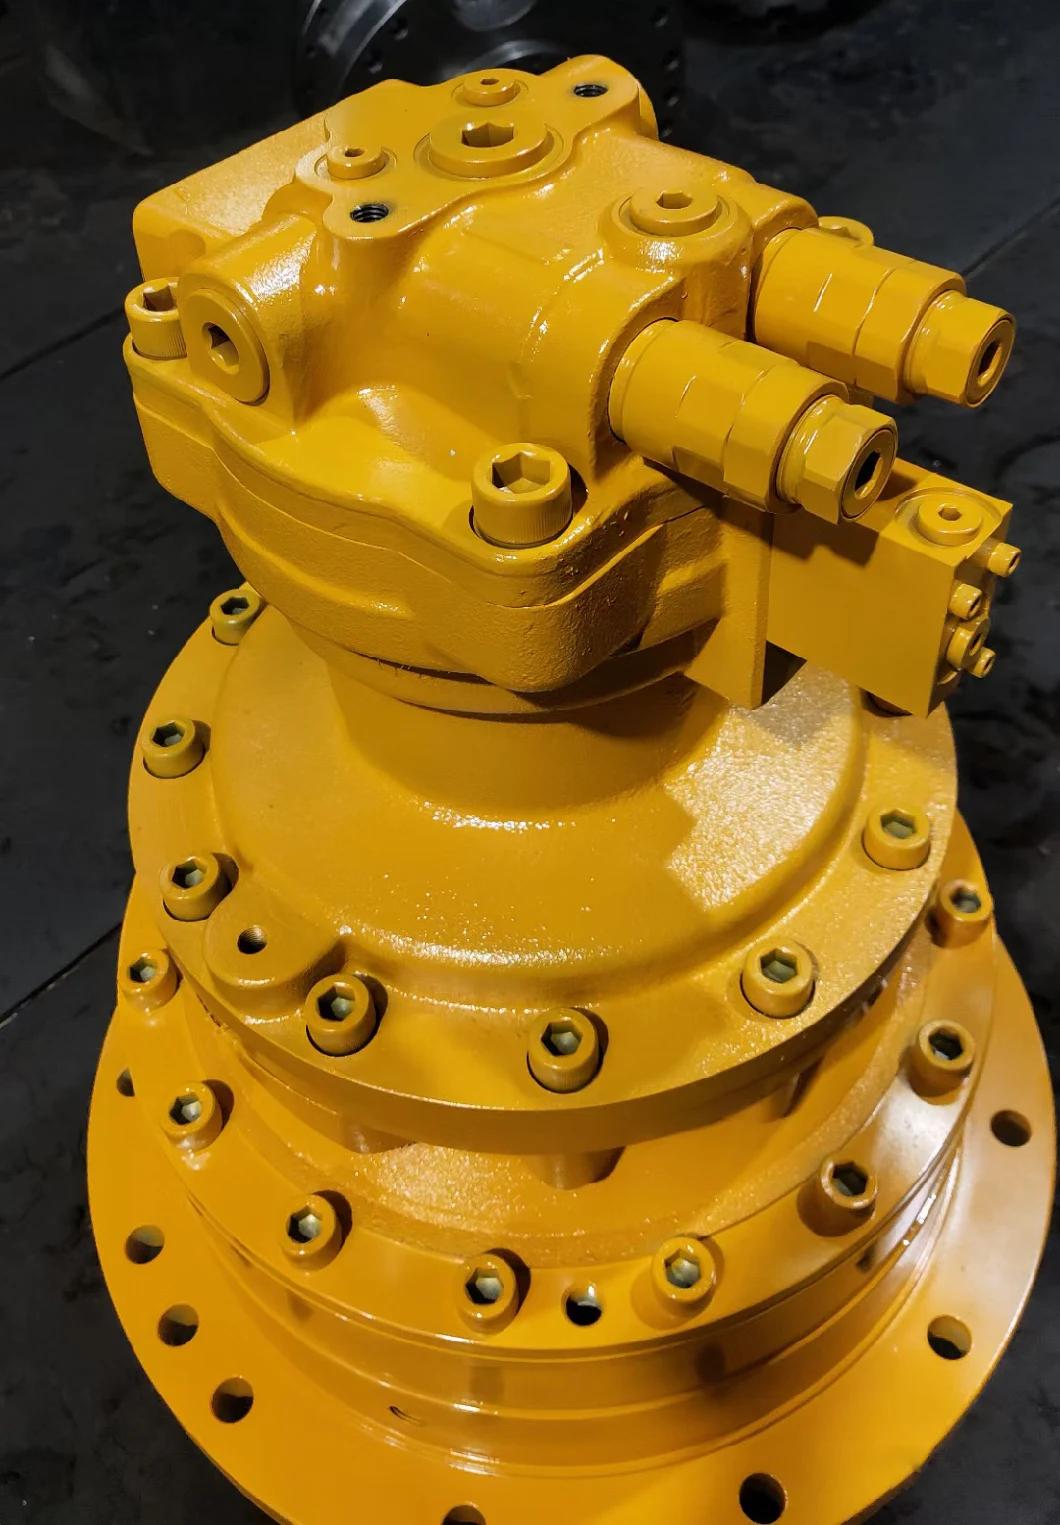 R307-7 R290-3 Swing Motor in Construction Machinery Gearbox Parts